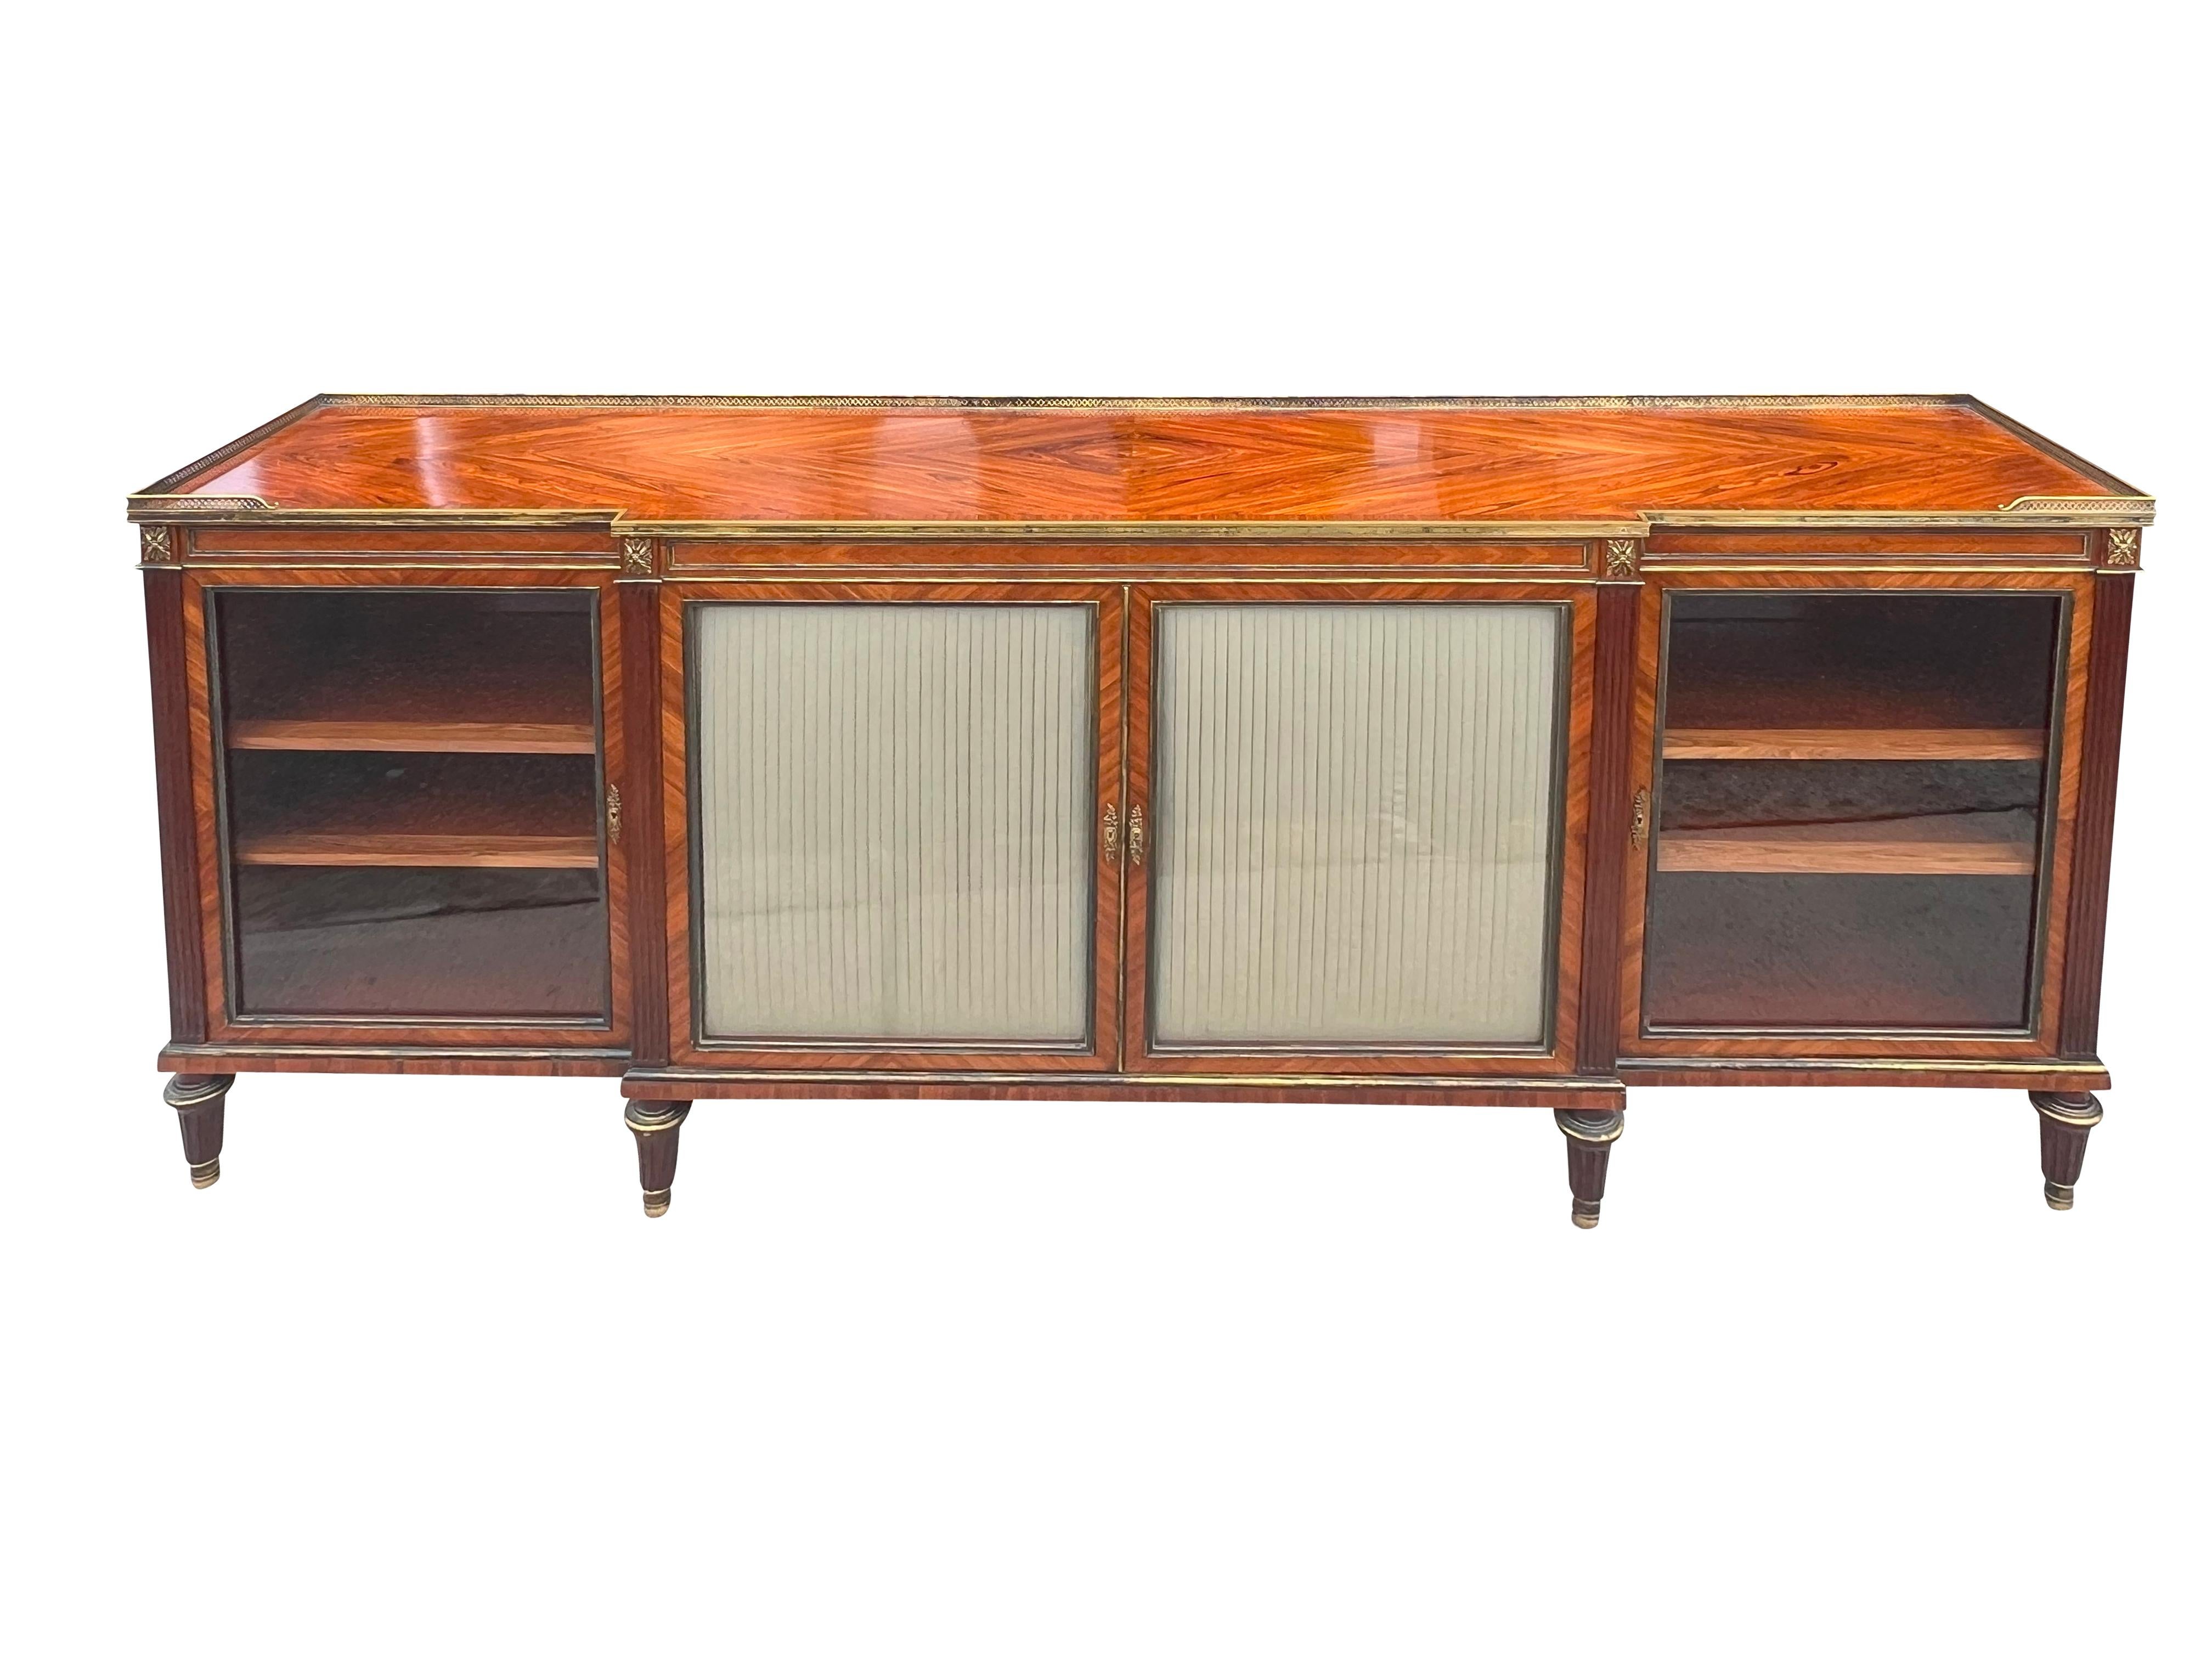 Fine Louis XVI Style Kingwood And Bronze Mounted Cabinet